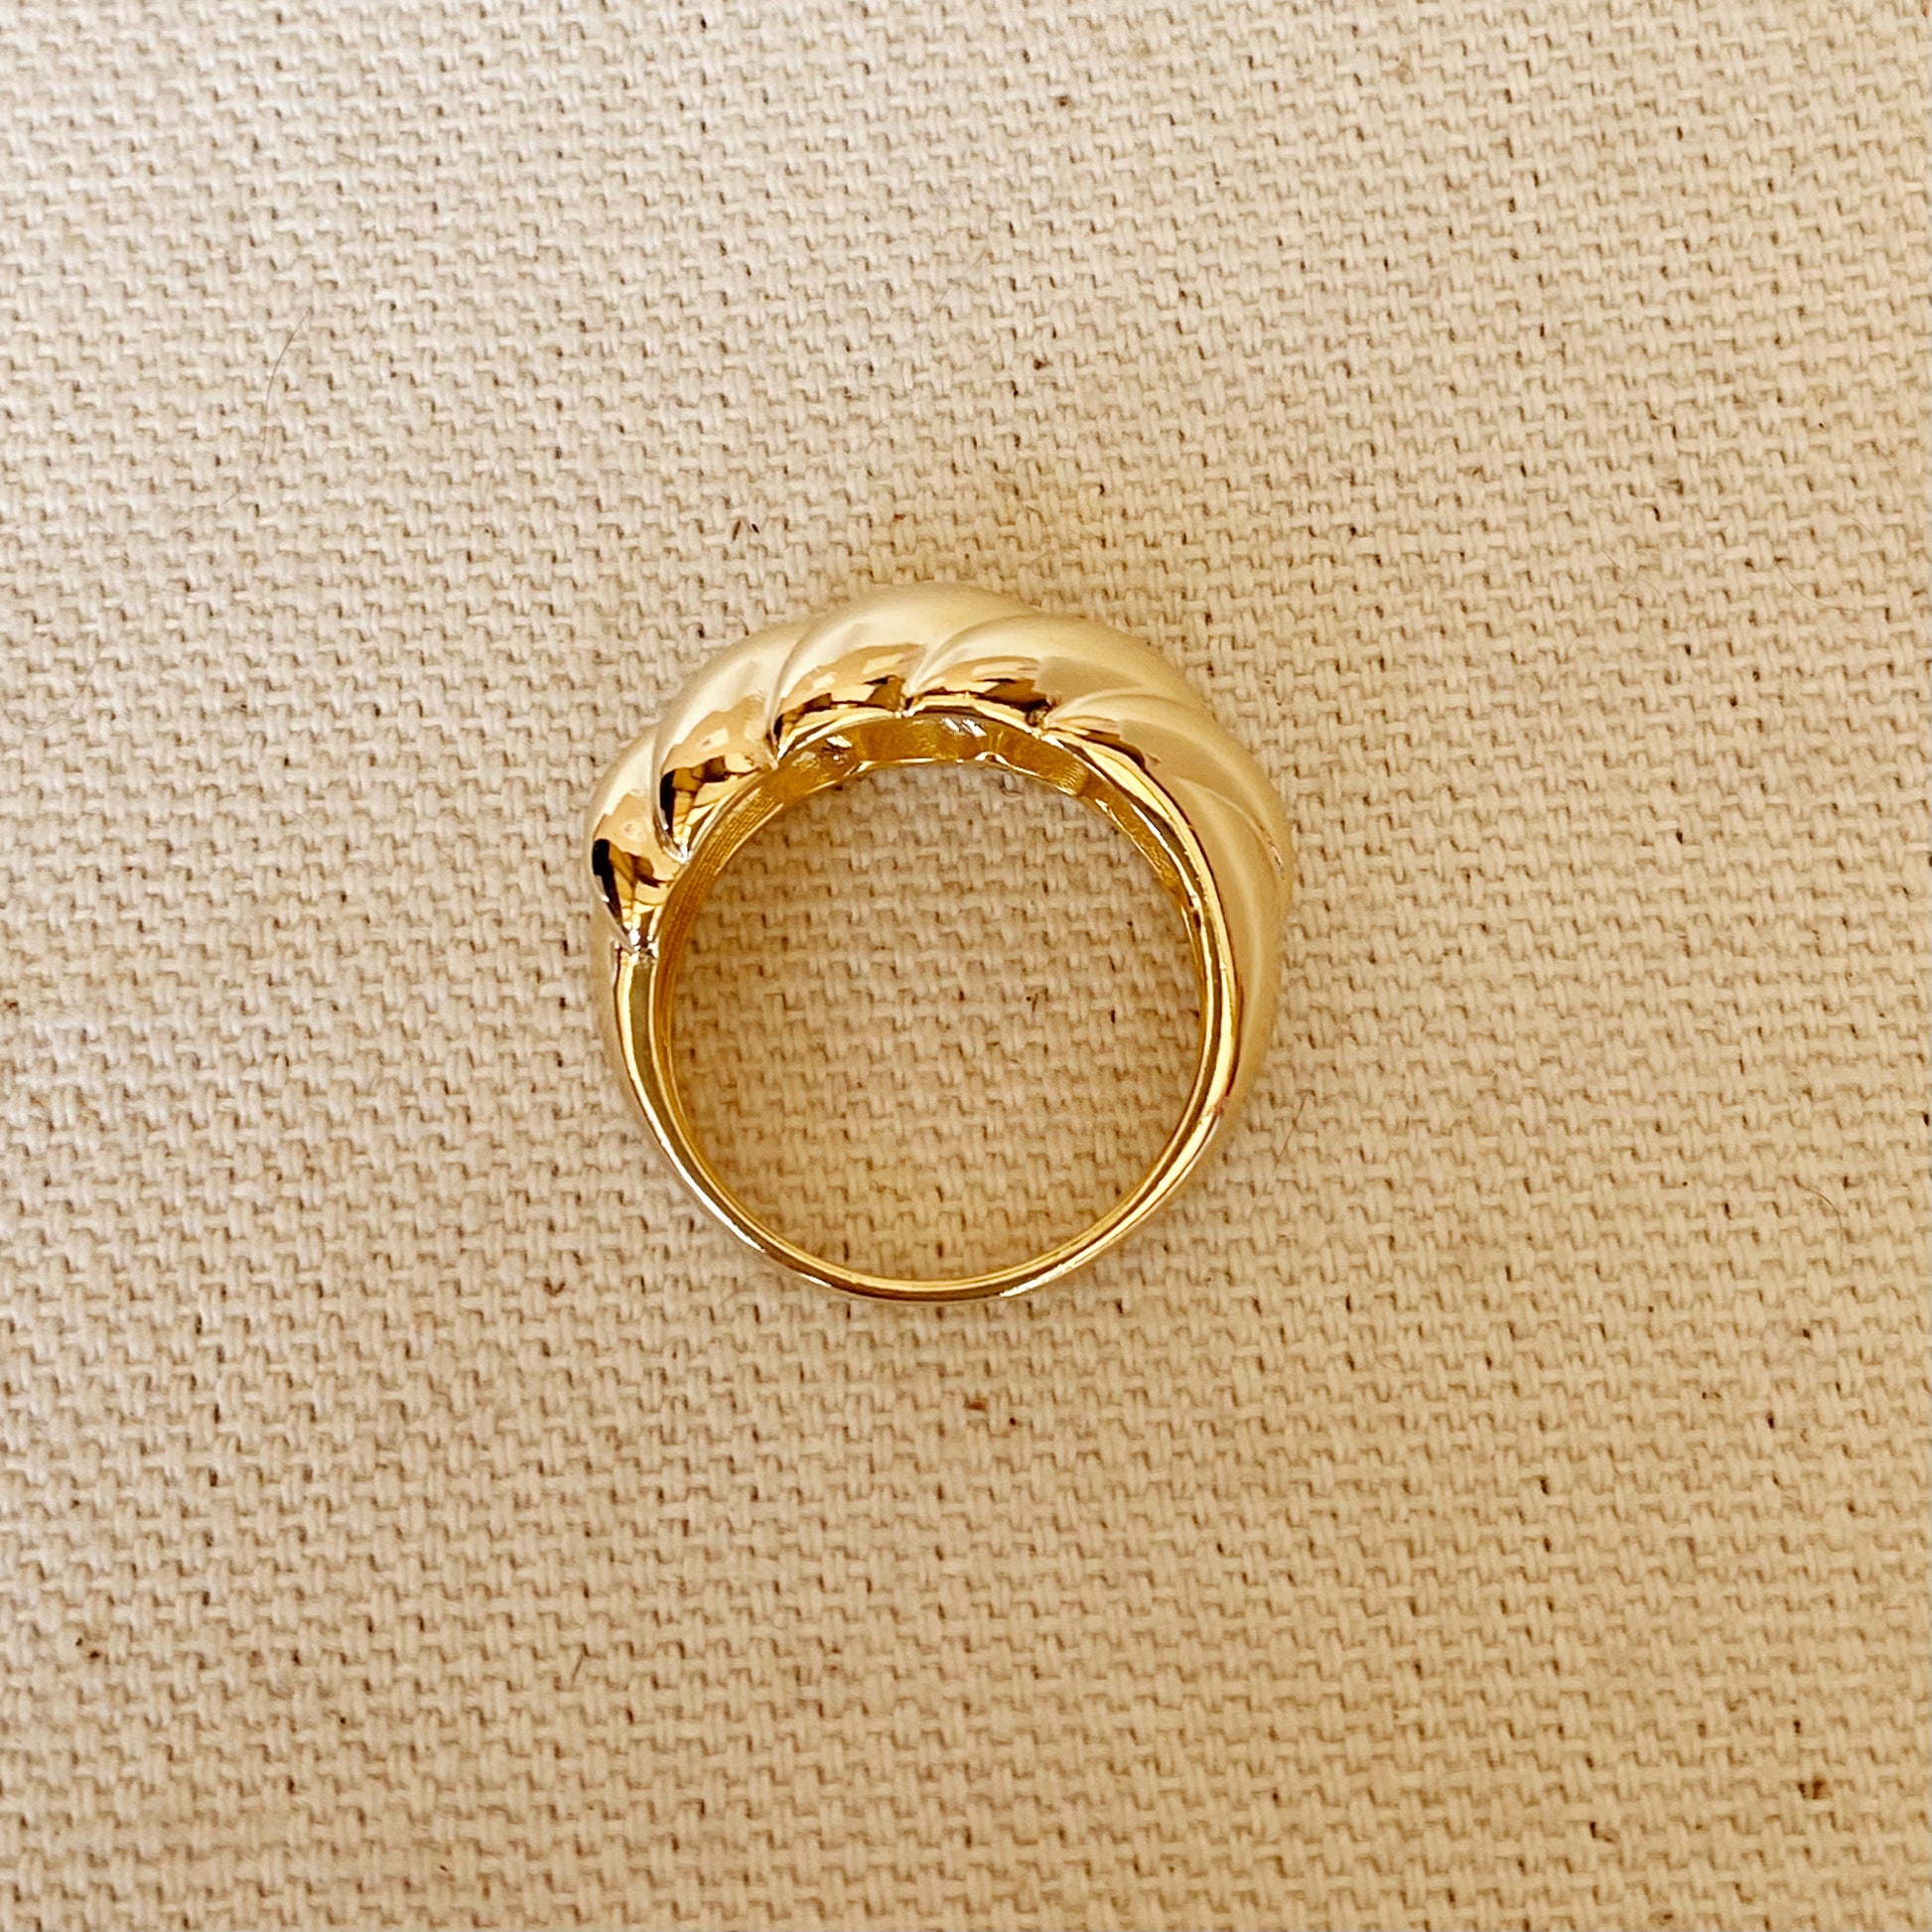 GoldFi 18k Gold Filled Dome Croissant Ring